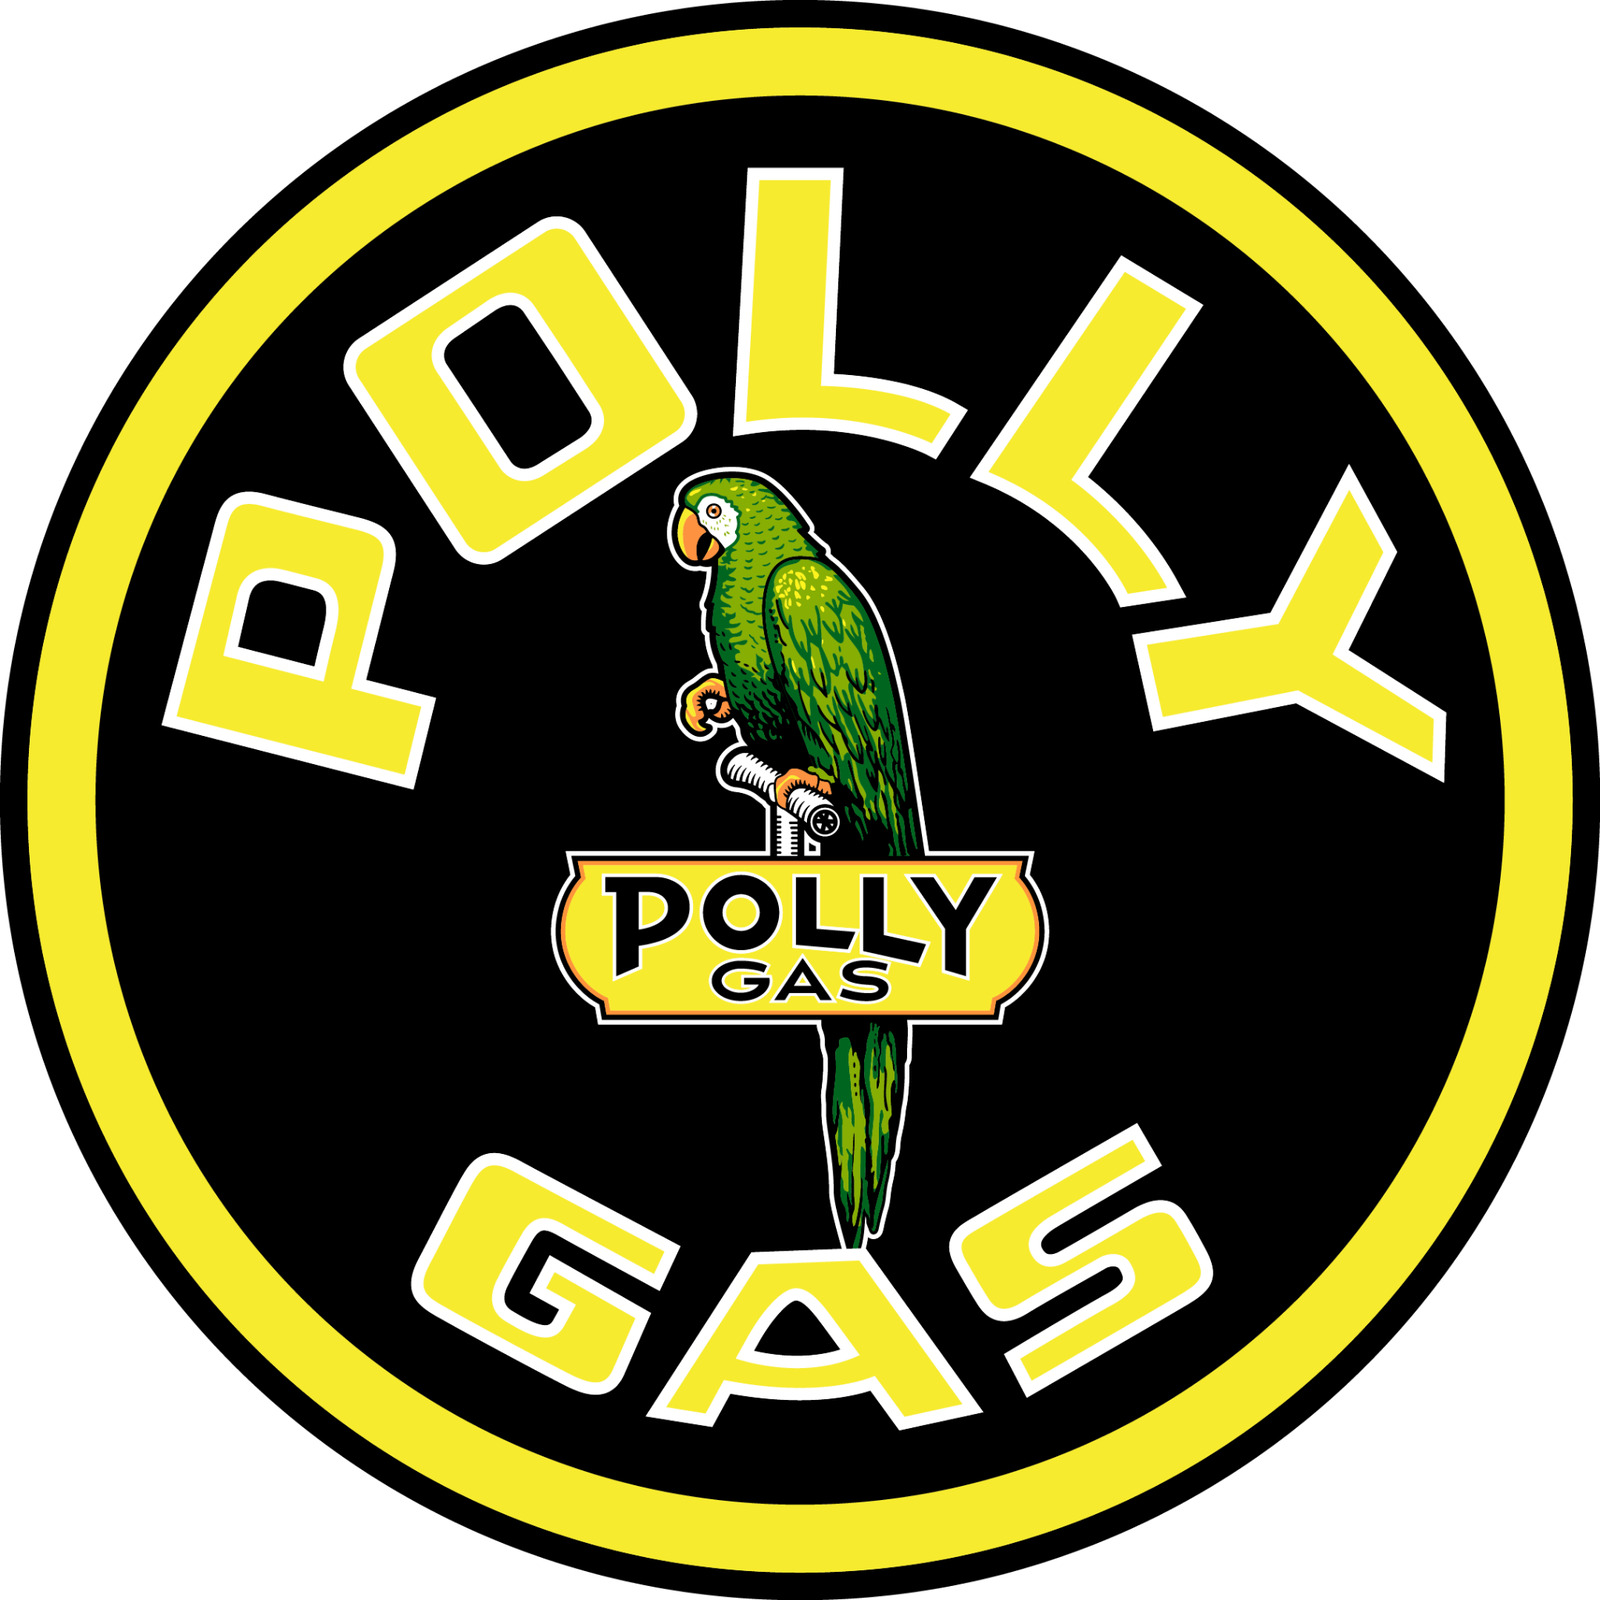 Polly Gas Parrot Circle OIL sticker Vinyl Decal |10 Sizes TRACKING 